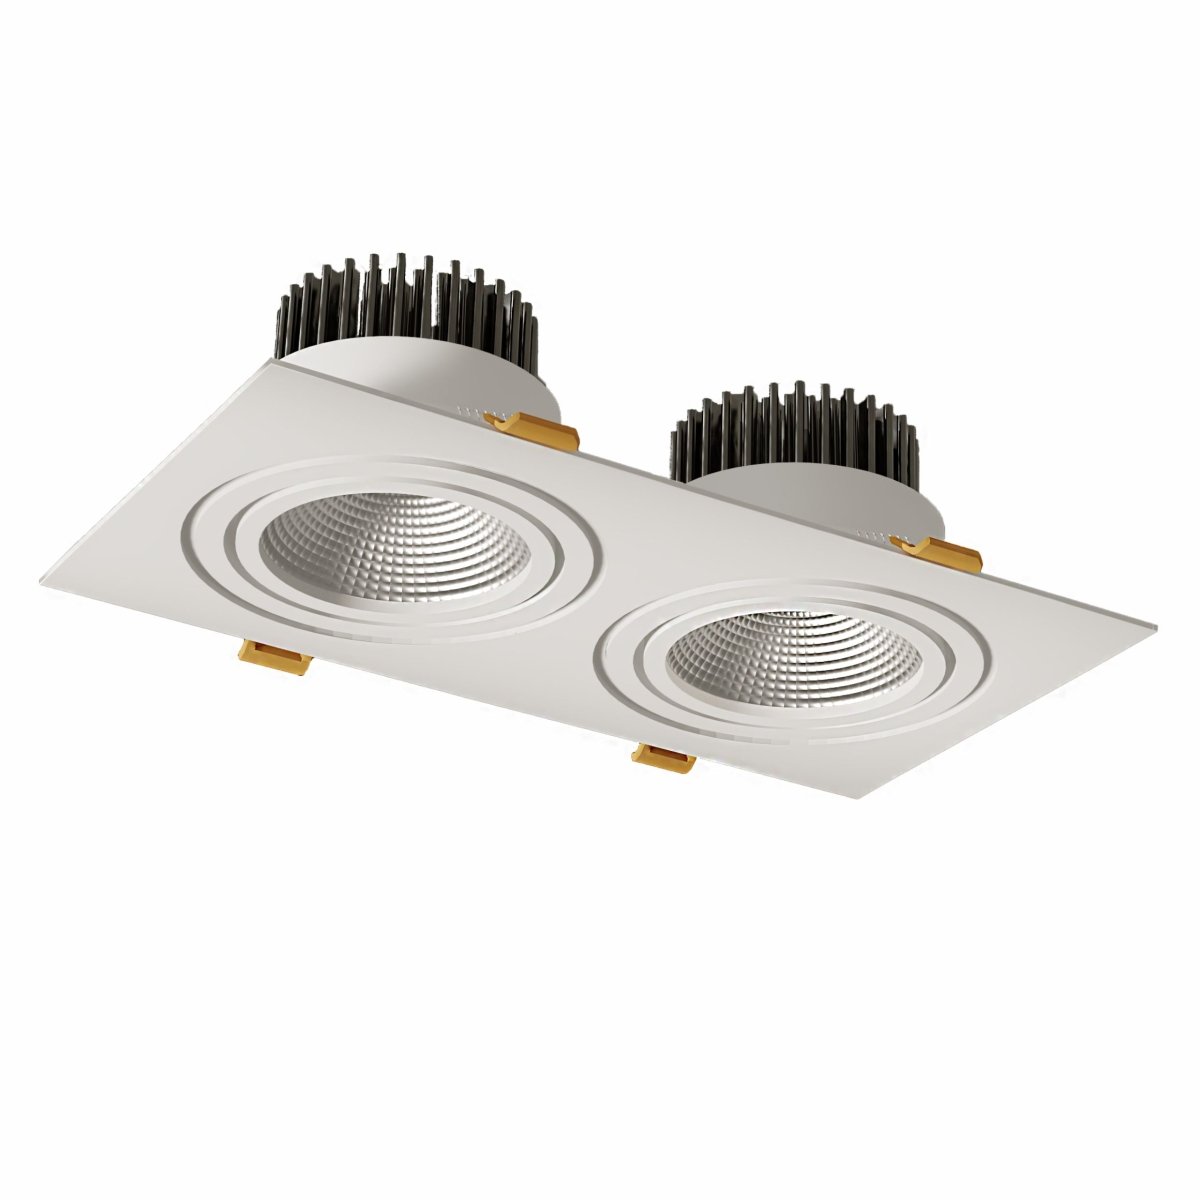 Main image of LED Recessed Downlight 2X10W Cool White 4000K White IP20